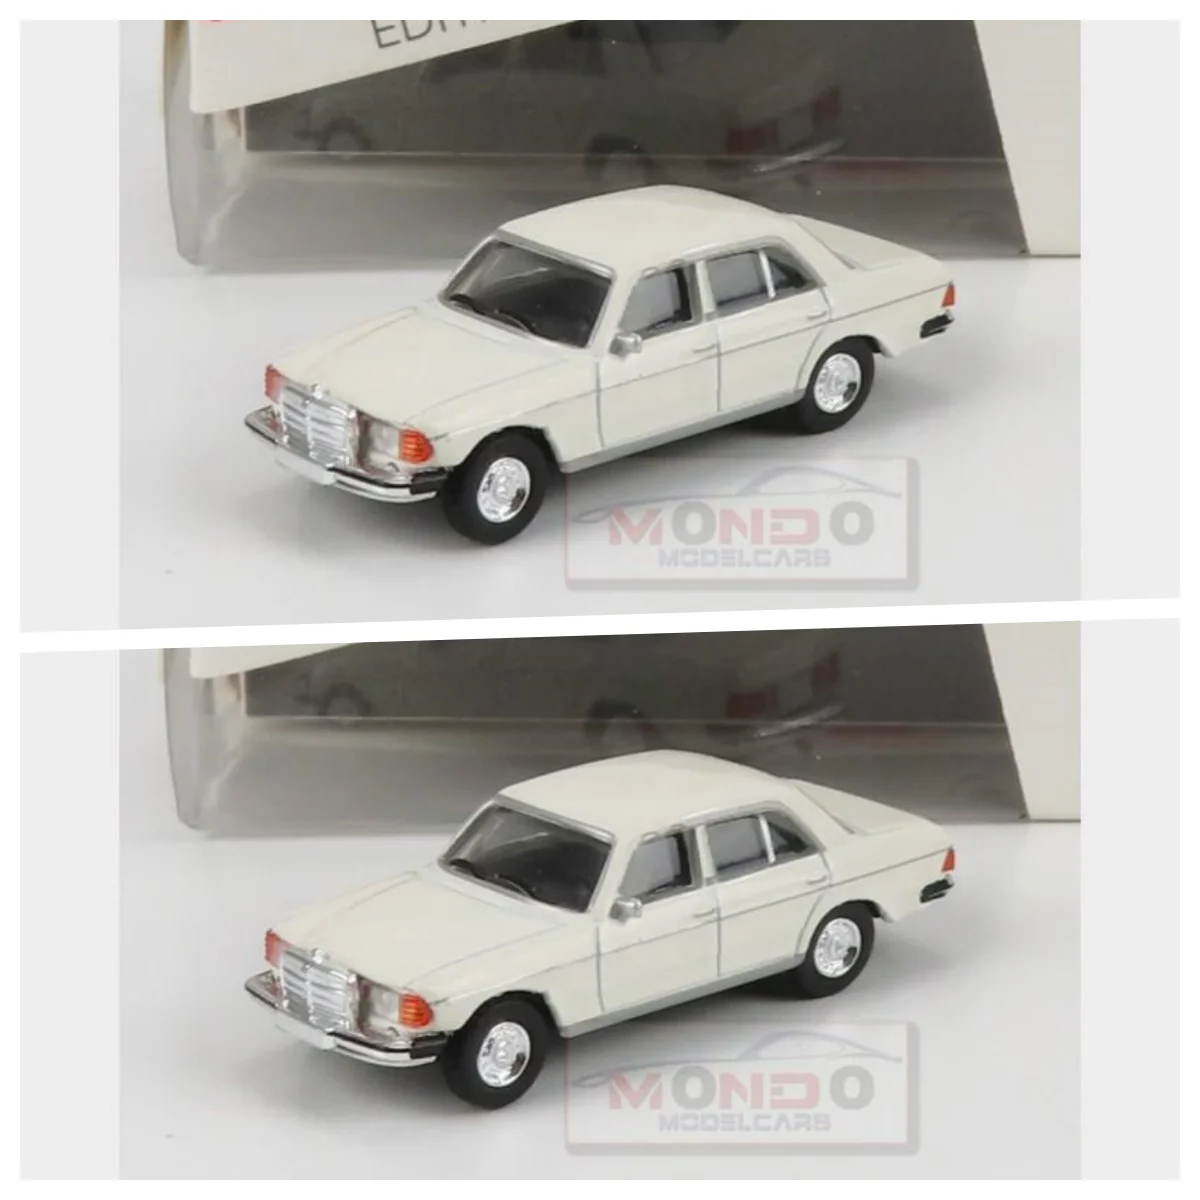 

1:87 SCHUCO E-Class 280E (W123) 1975 White DieCast Model Car Collection Limited Edition Hobby Toys